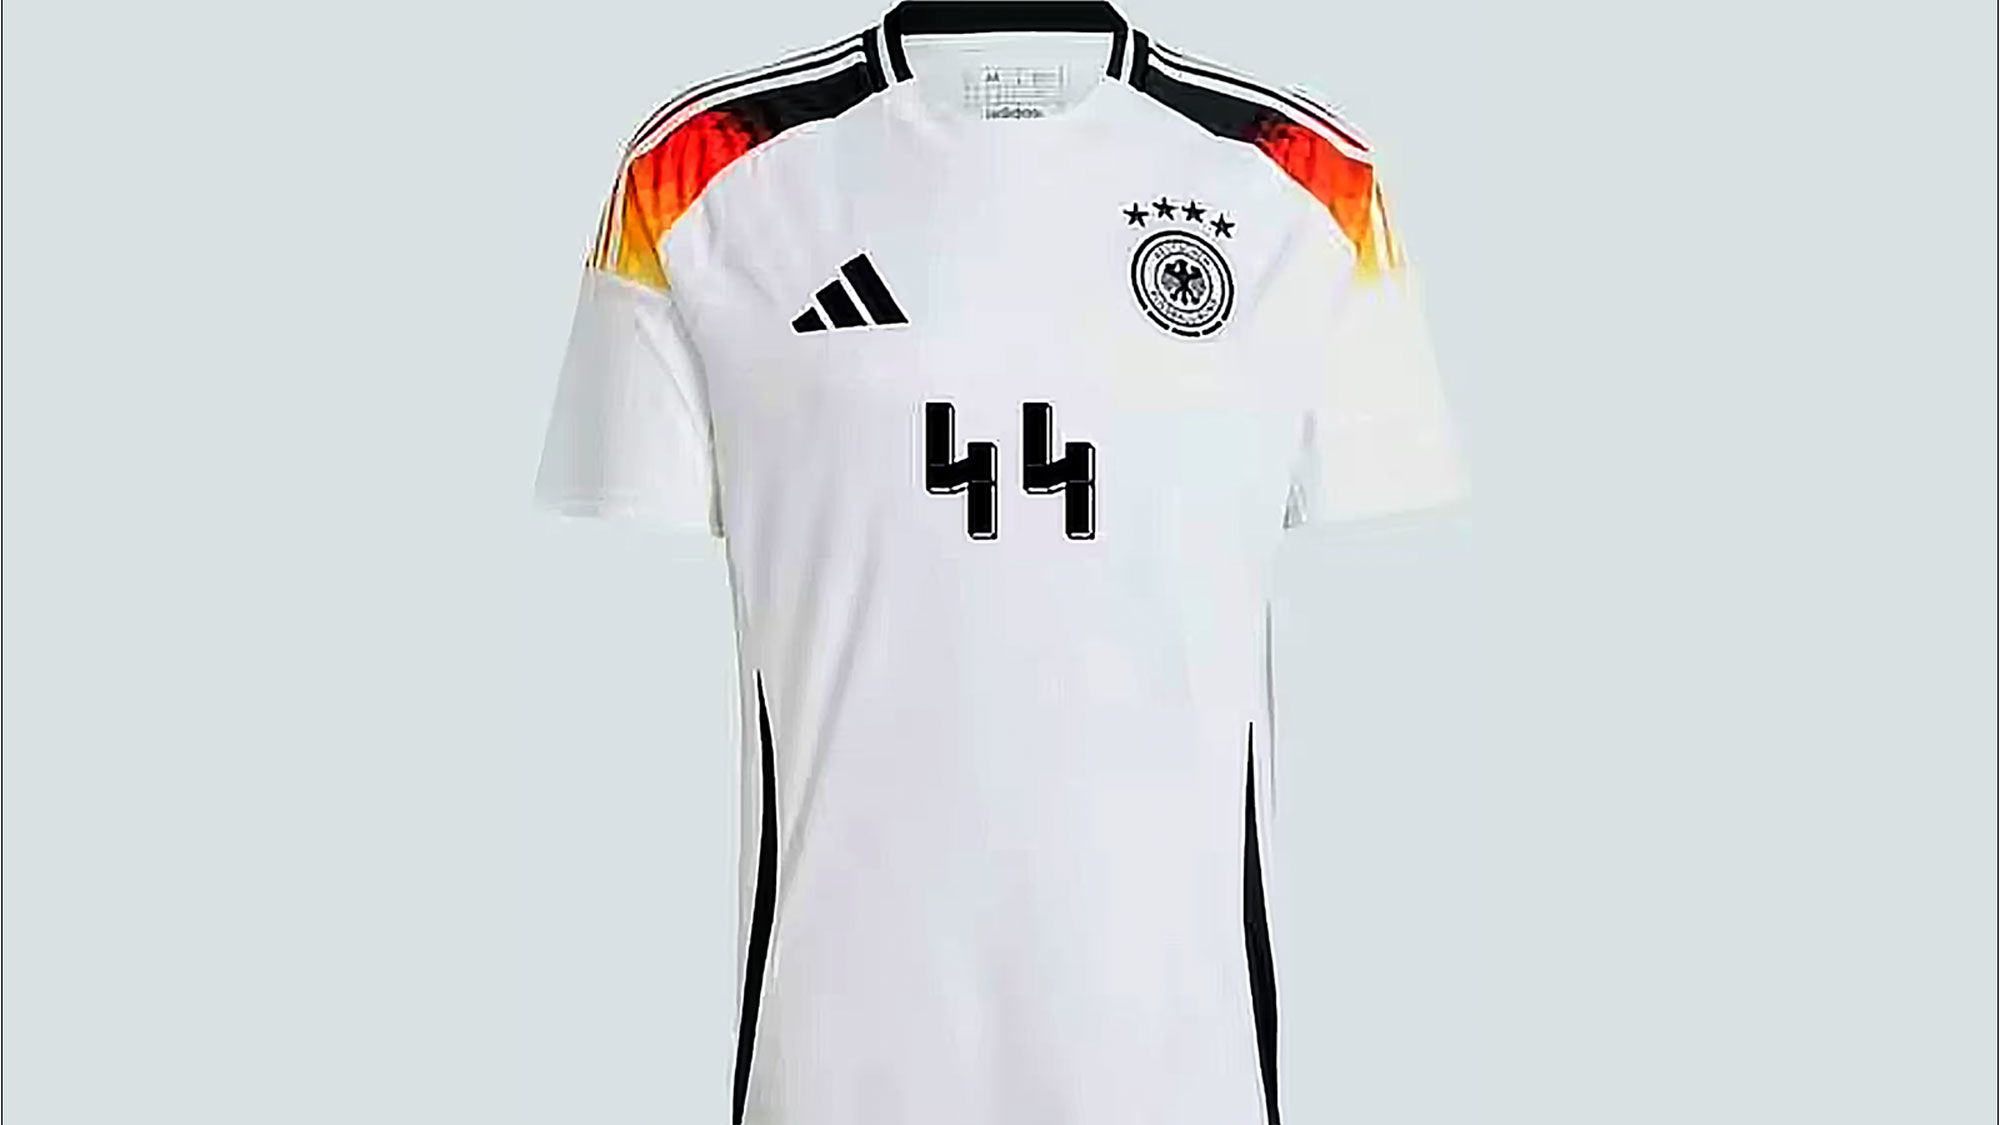 Social media users began using Adidas' online customization service to create jerseys bearing the number “44,” which many said resembled a logo used by the SS.